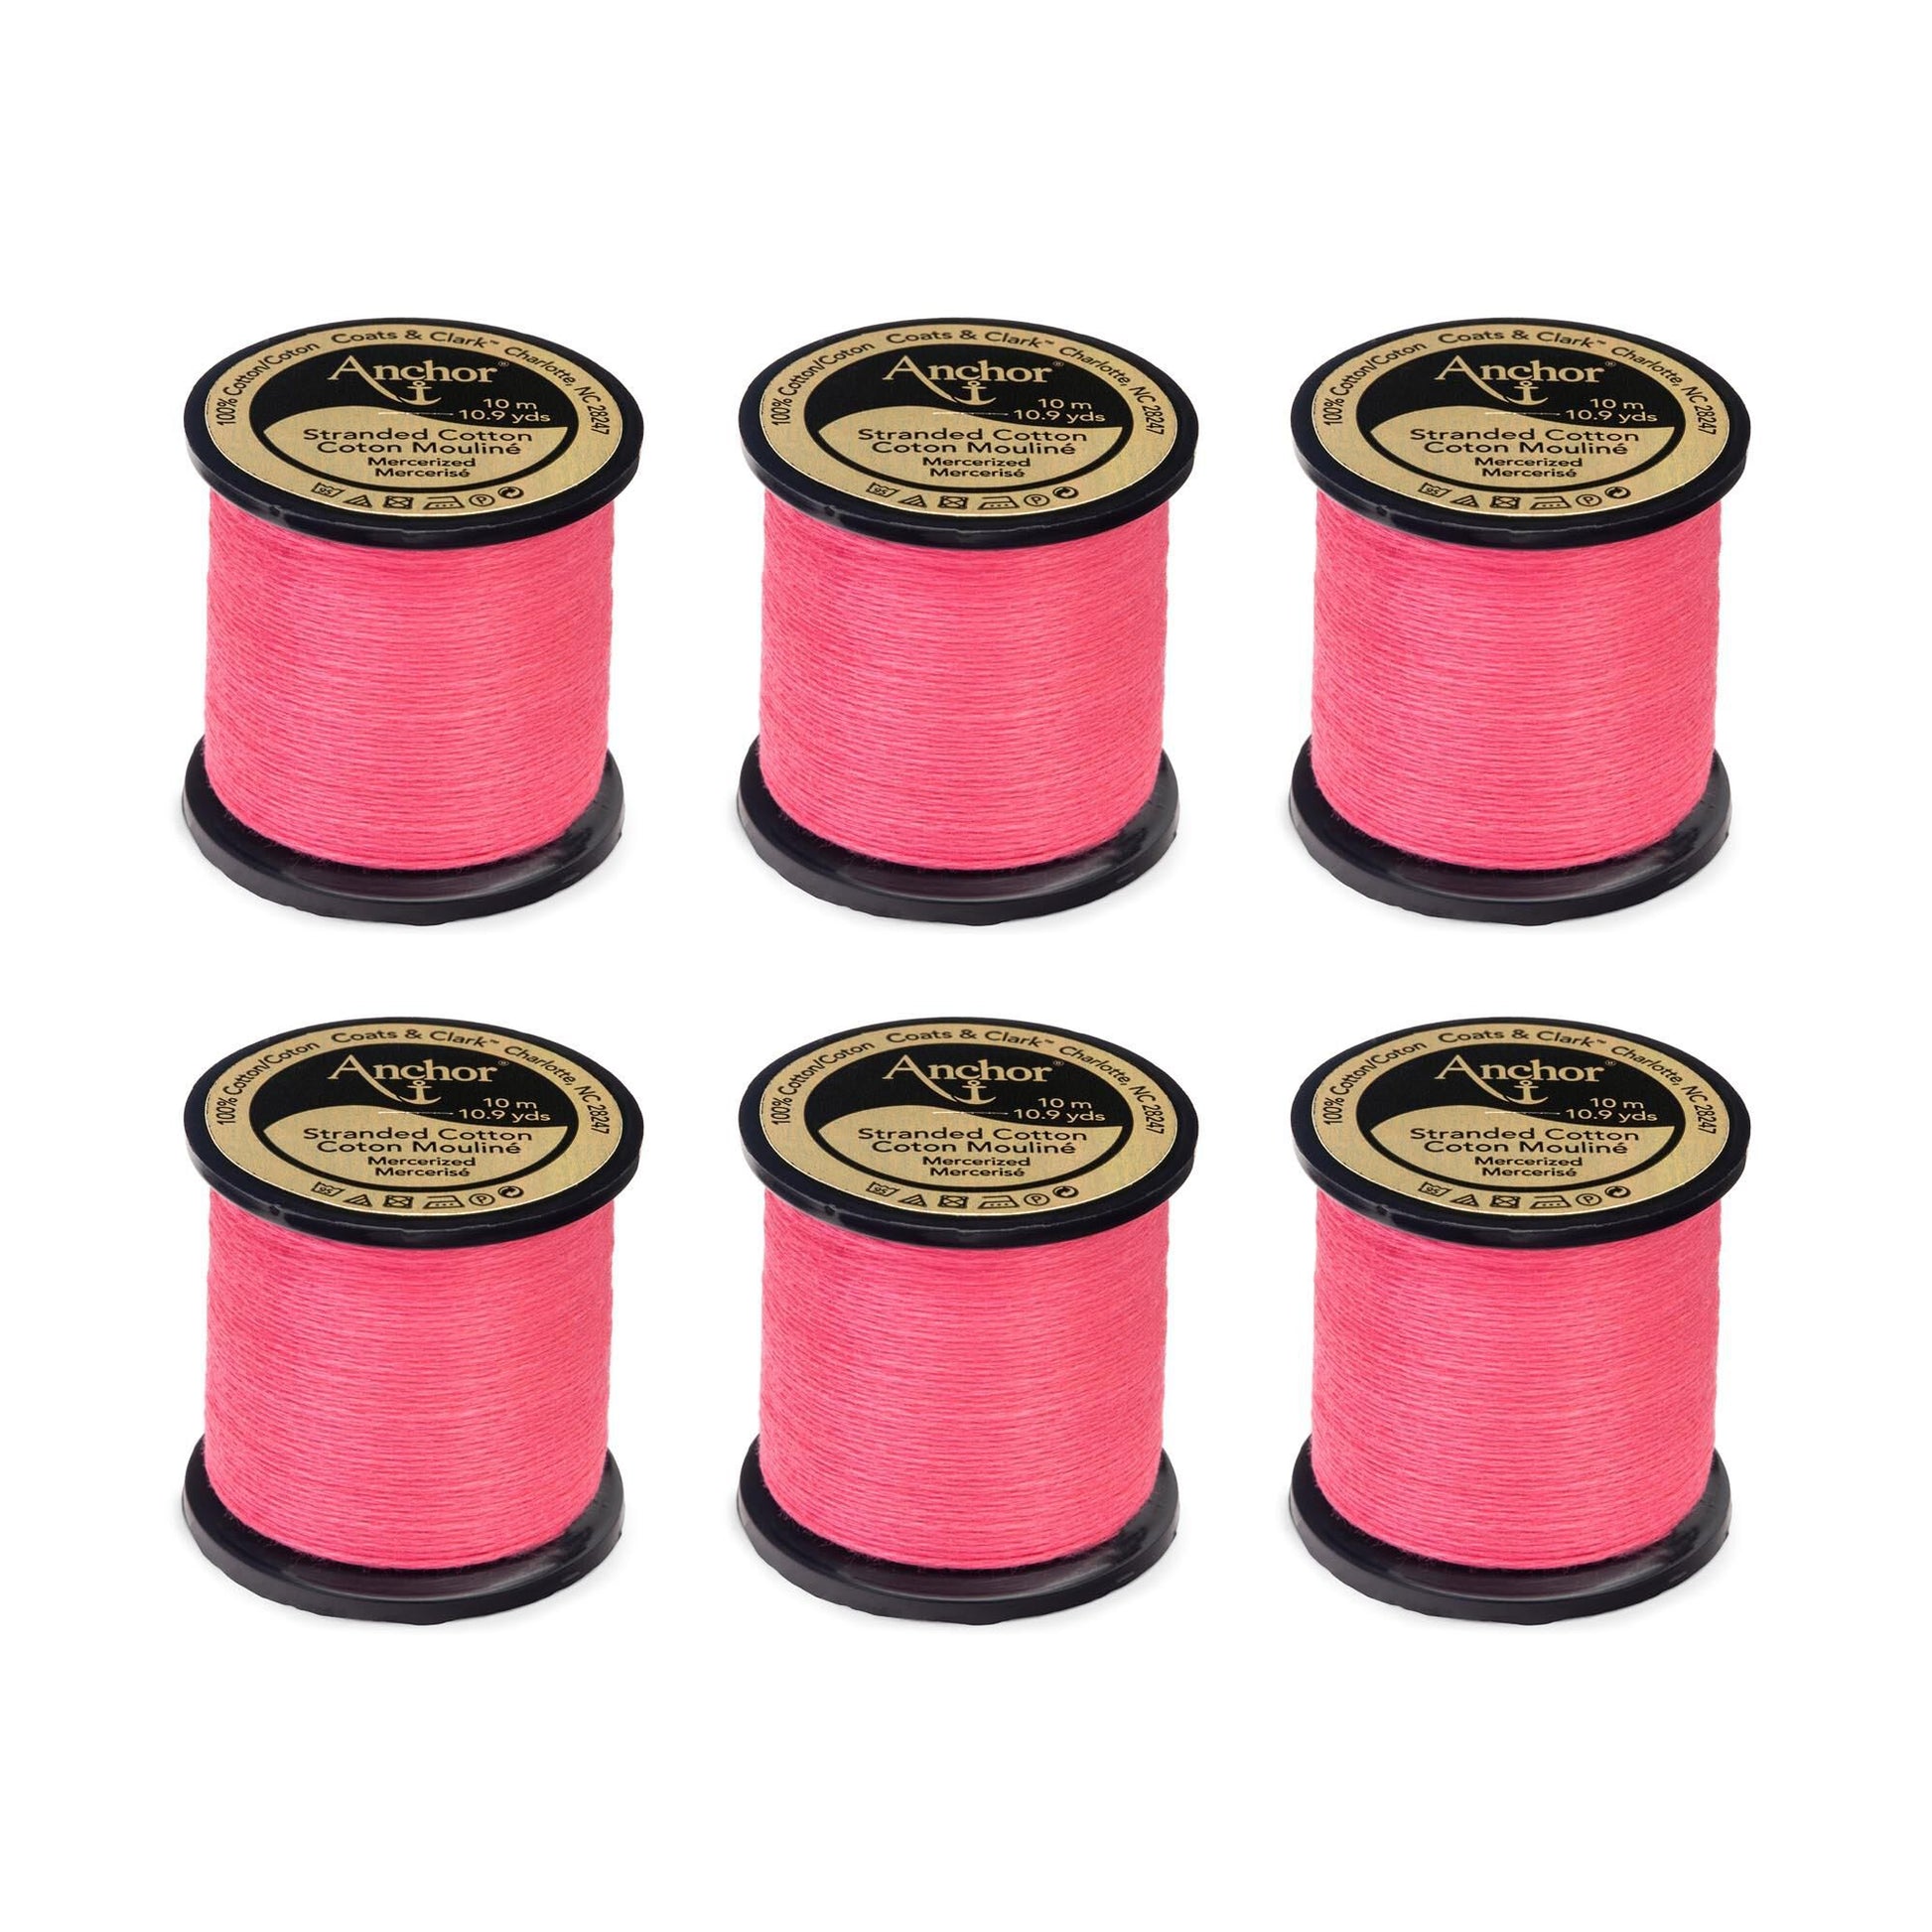 Anchor Spooled Floss 10 Meters (6 Pack) 0040 Carmine Rose Light